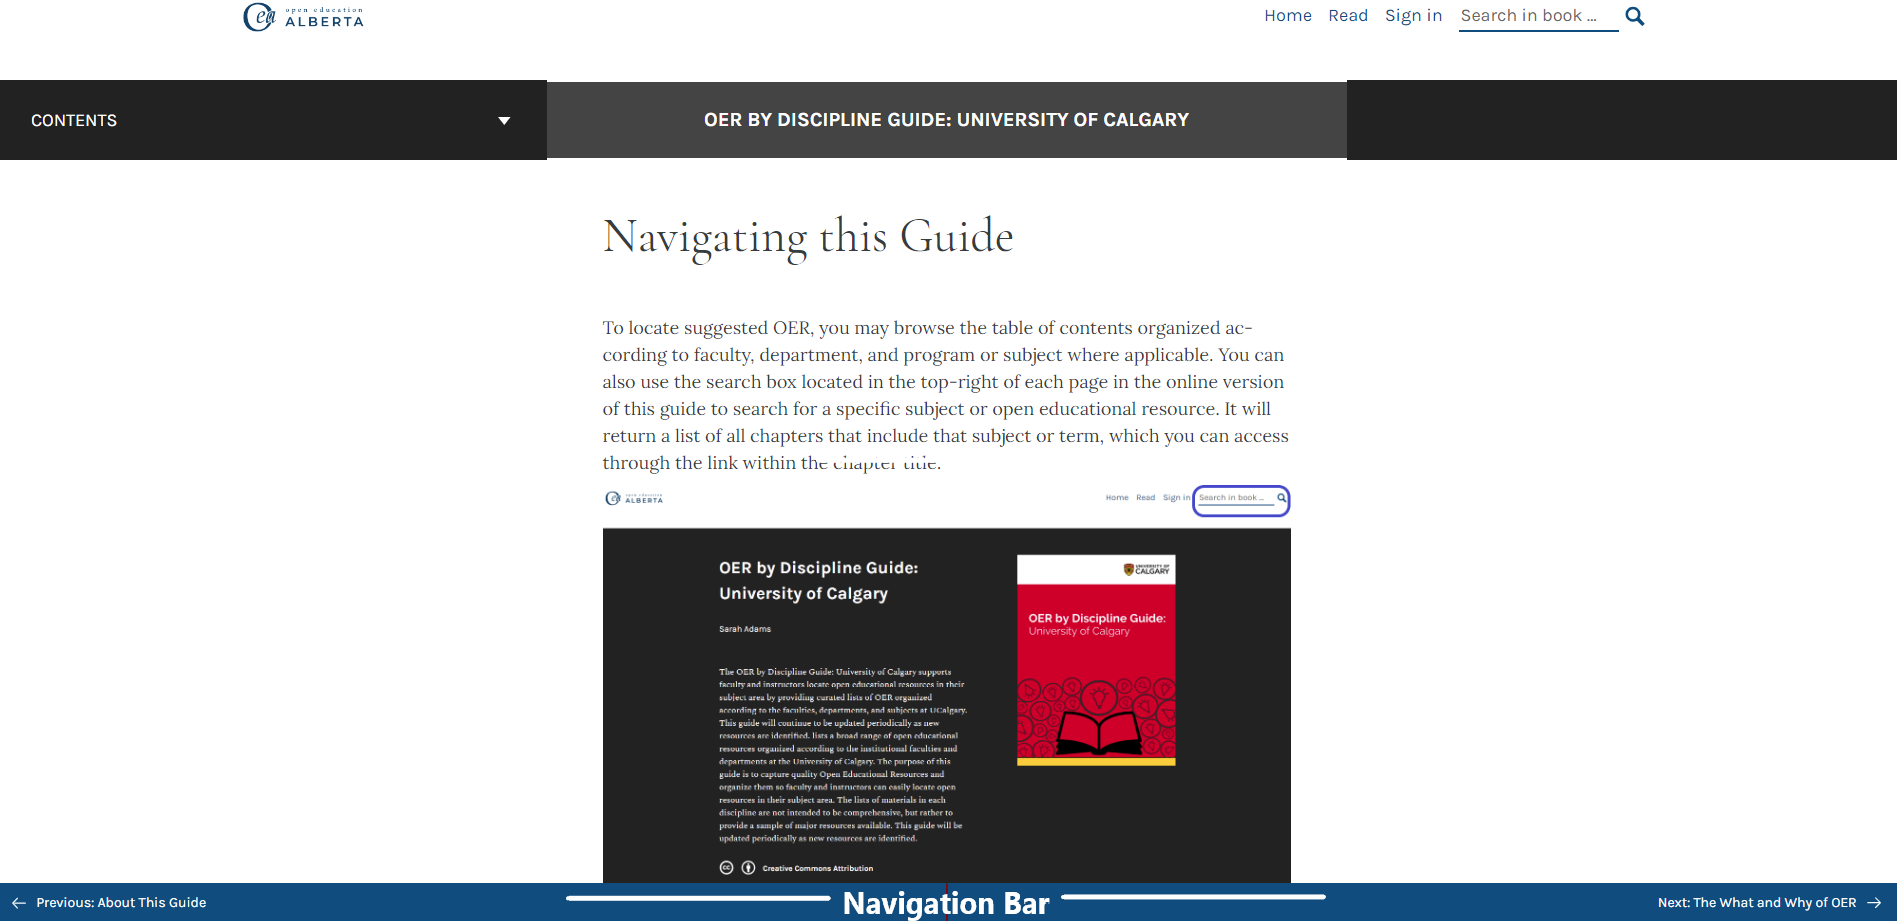 OER by Discipline Guide: UCalgary Navigating this Guide page with added Navigation Bar titled at bottom of browser